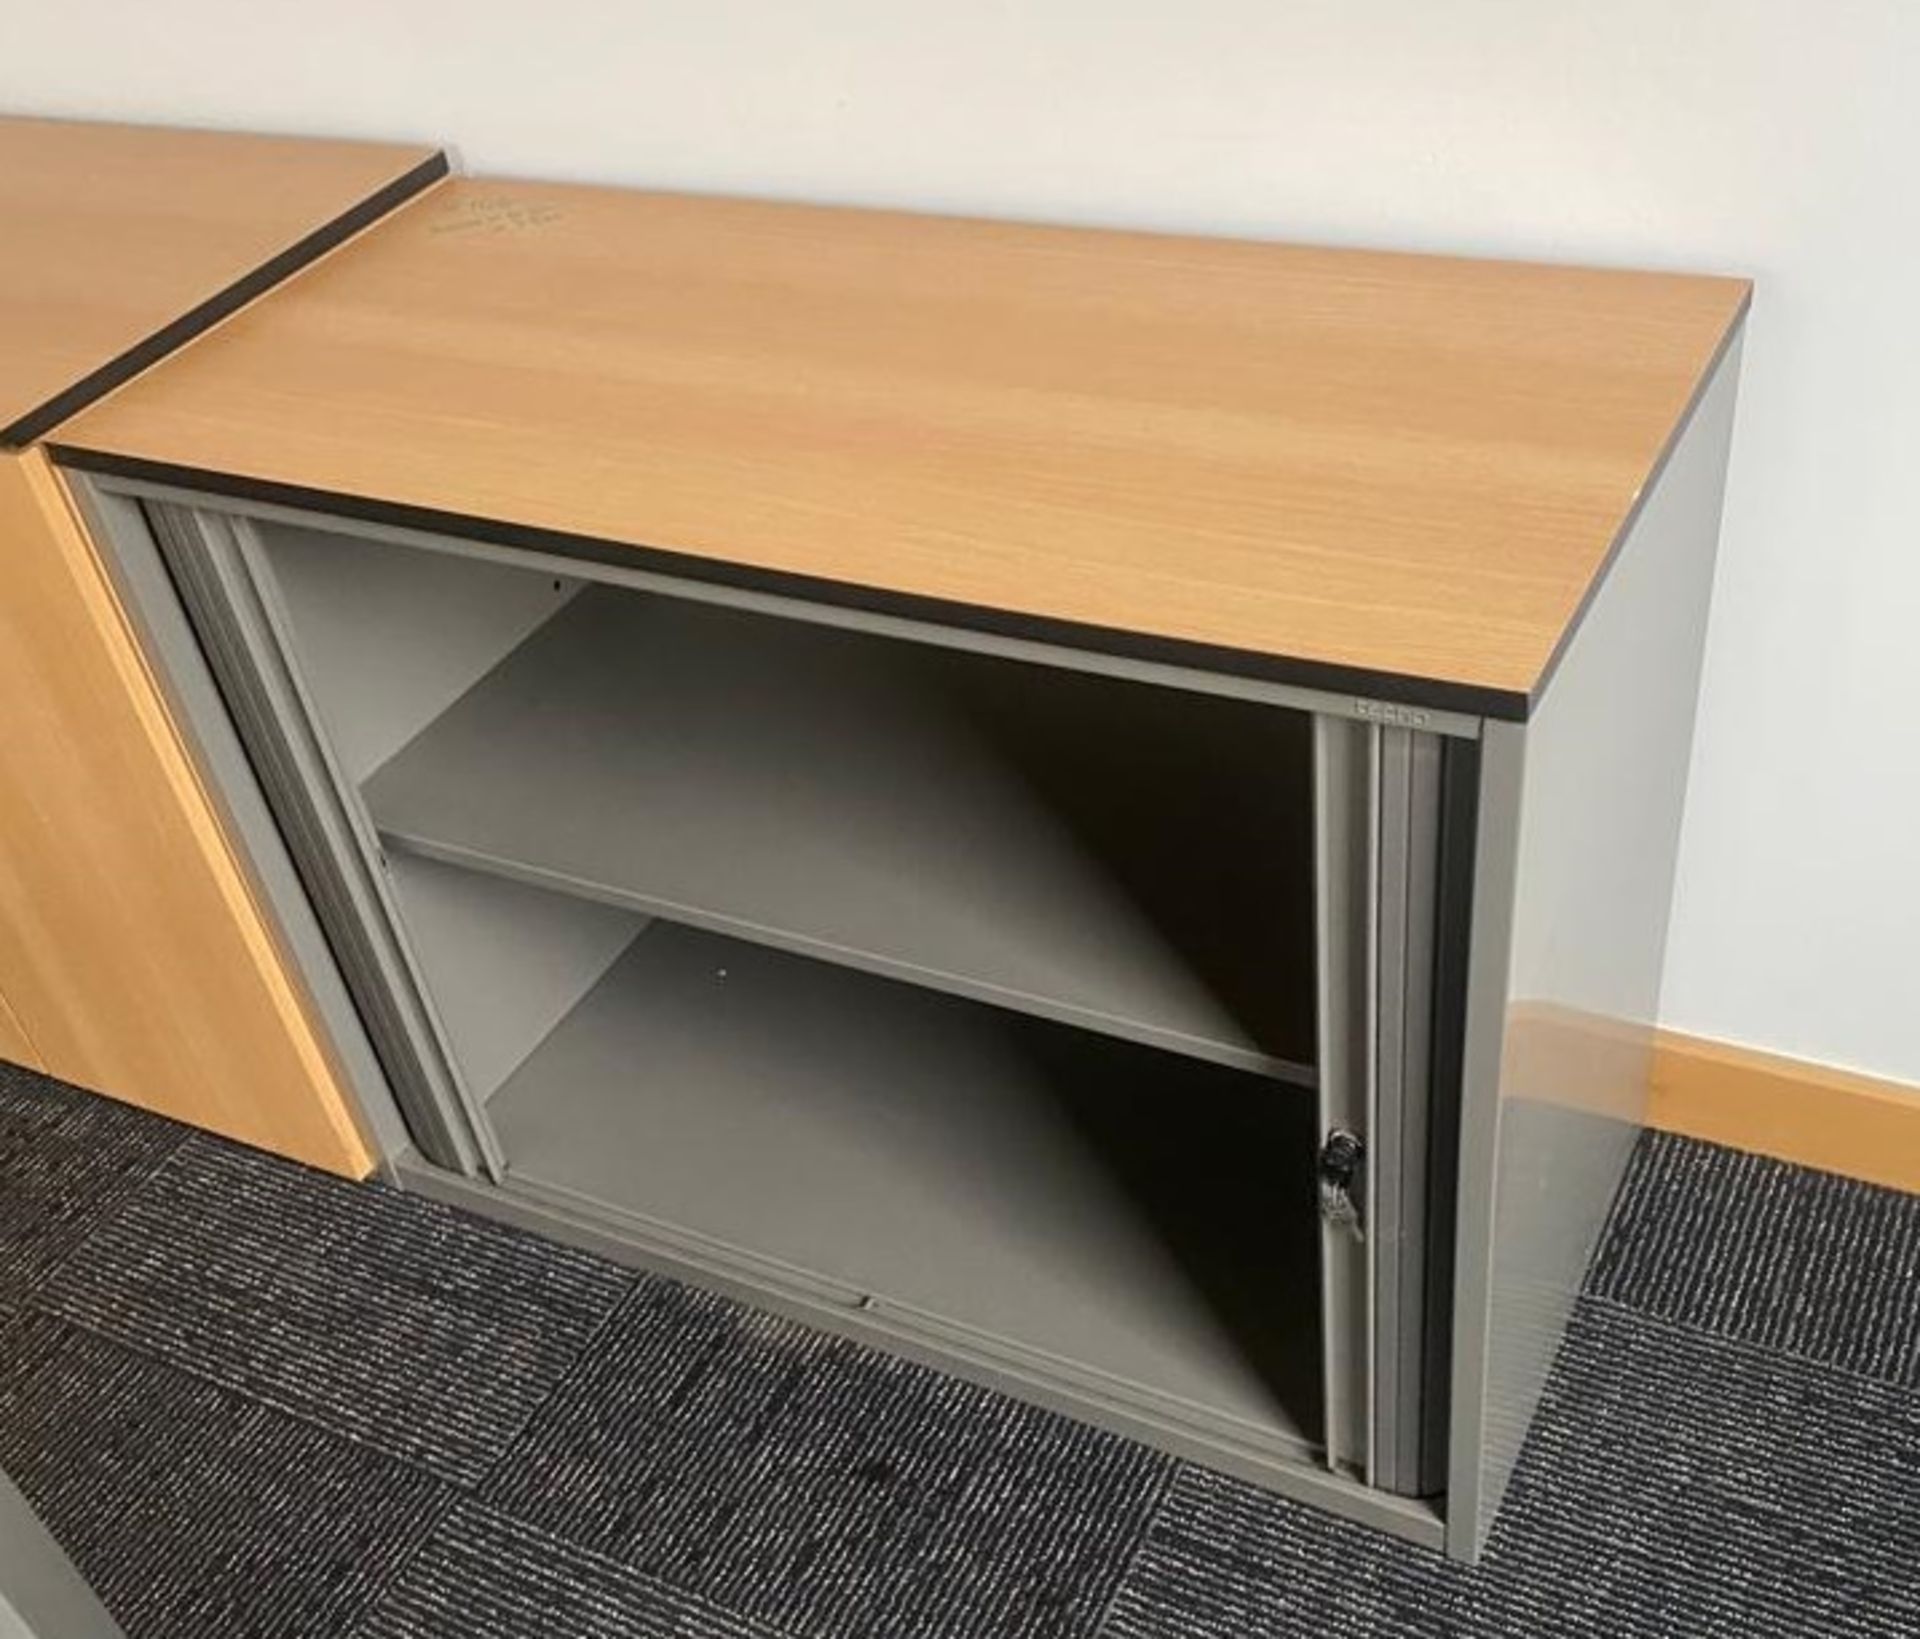 1 x Office Storage Cabinet With Beech Wood Top and Grey Sliding Tambour Doors - Size: H75 x W100 - Image 2 of 2